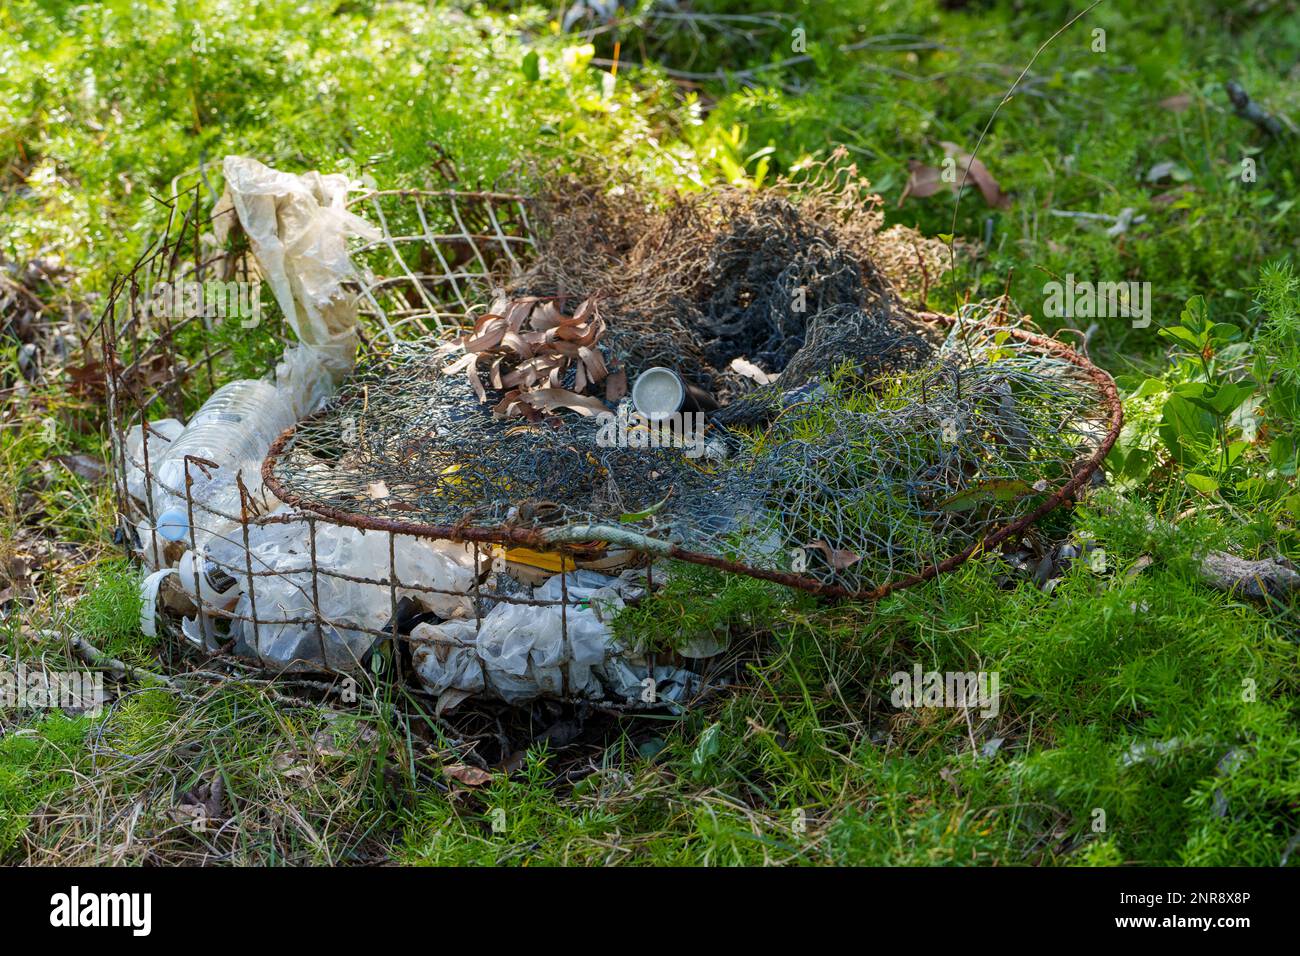 Disused crab pot filled with rubbish sitting on the ground amongst invasive weeds. Coochiemudlo Island, Queensland, Australia Stock Photo